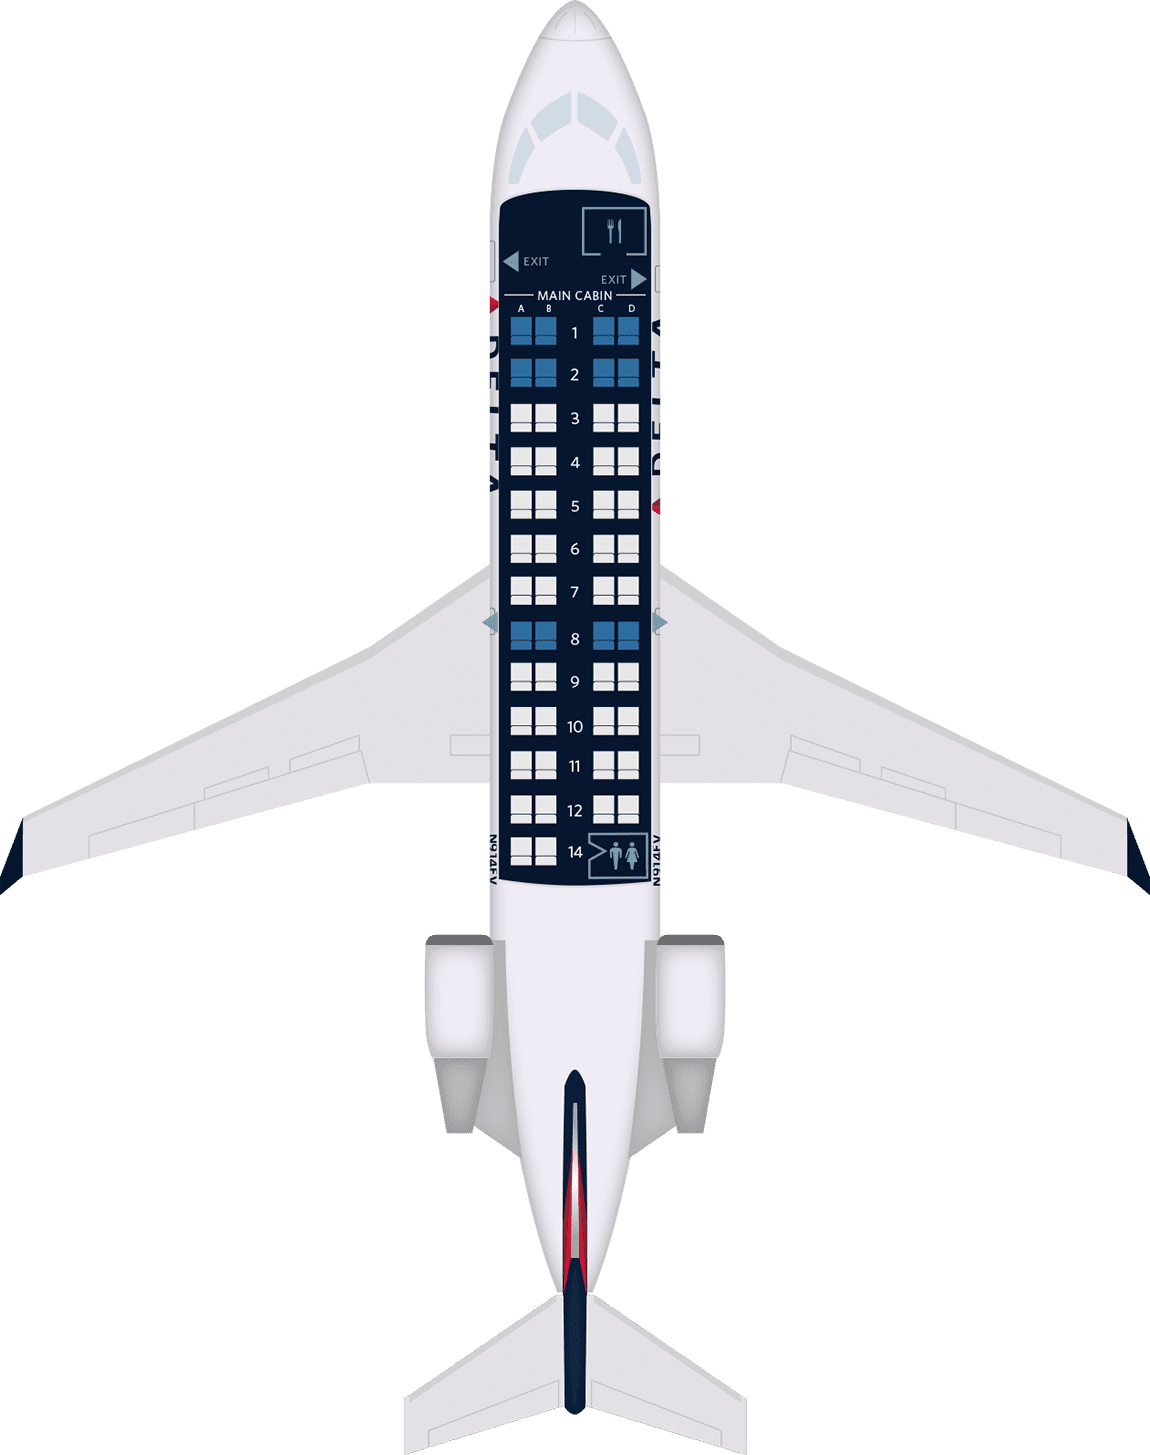 Canadair Regional Jet 900 American Airlines Wifi Bombardier Crj 200 Aircraft Seat Maps Specs Amenities